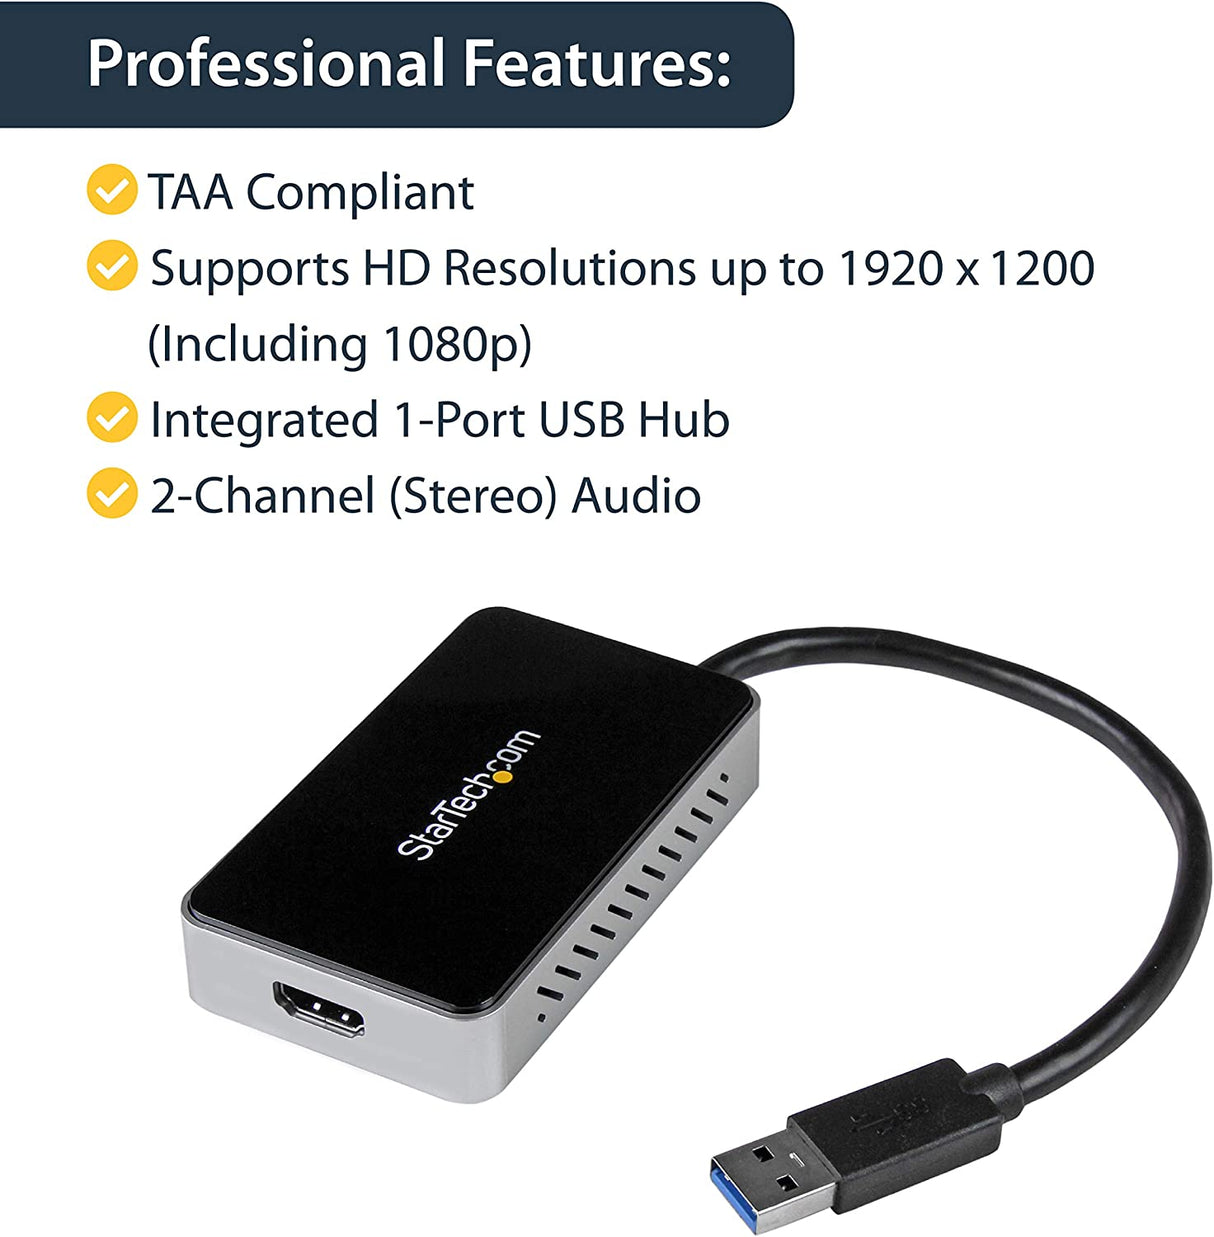 StarTech USB 3.0 to HDMI/DVI External Video Card Multi Monitor Adapter  review